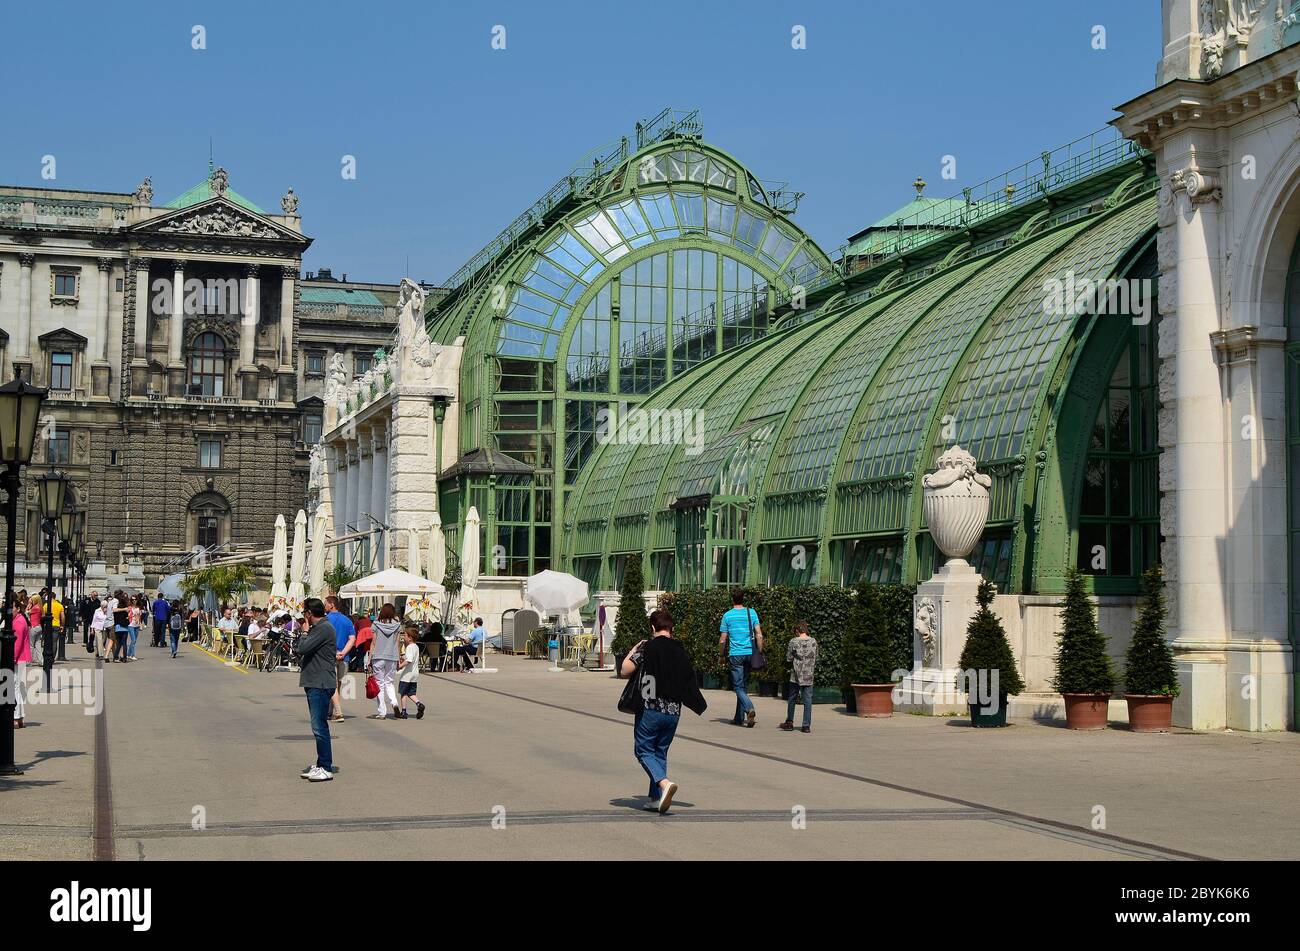 Vienna, Austria - April 24th 2011: unidentified people walk and take a rest in the new renovated palm house cafe in public Burggarten, with Hofburg bu Stock Photo